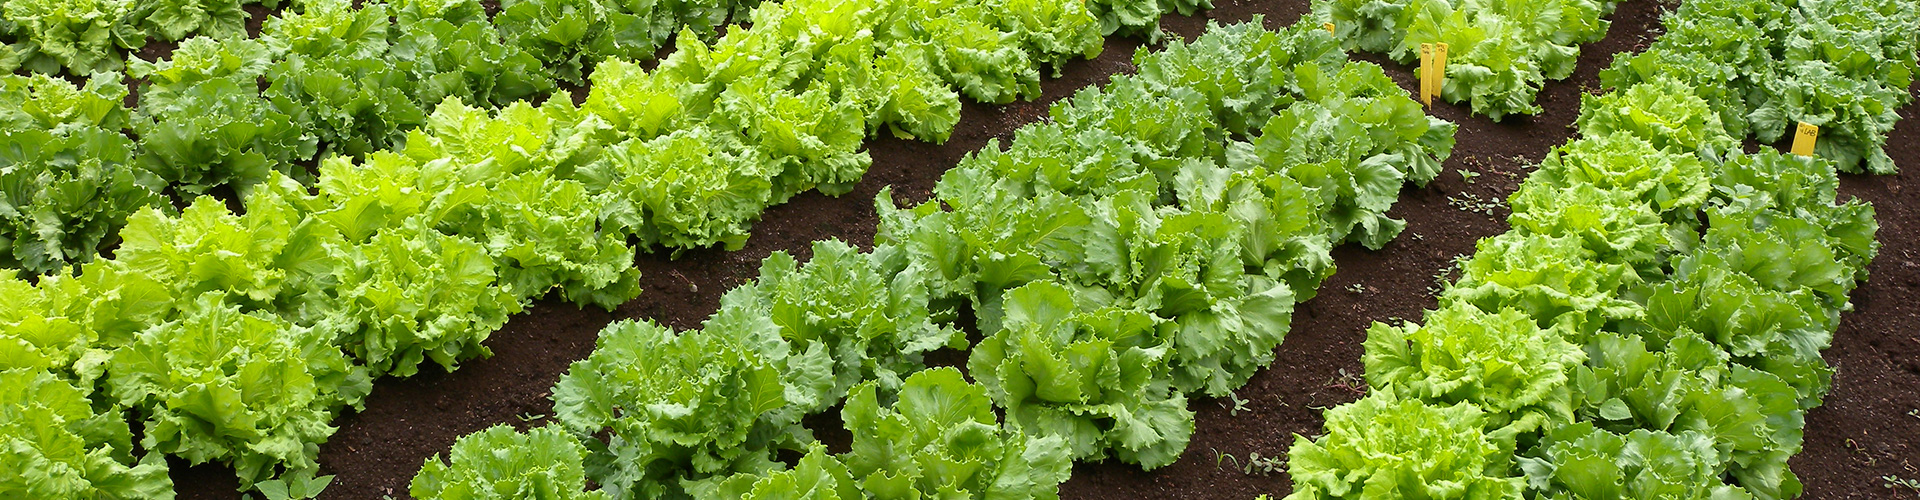 lettuce producers